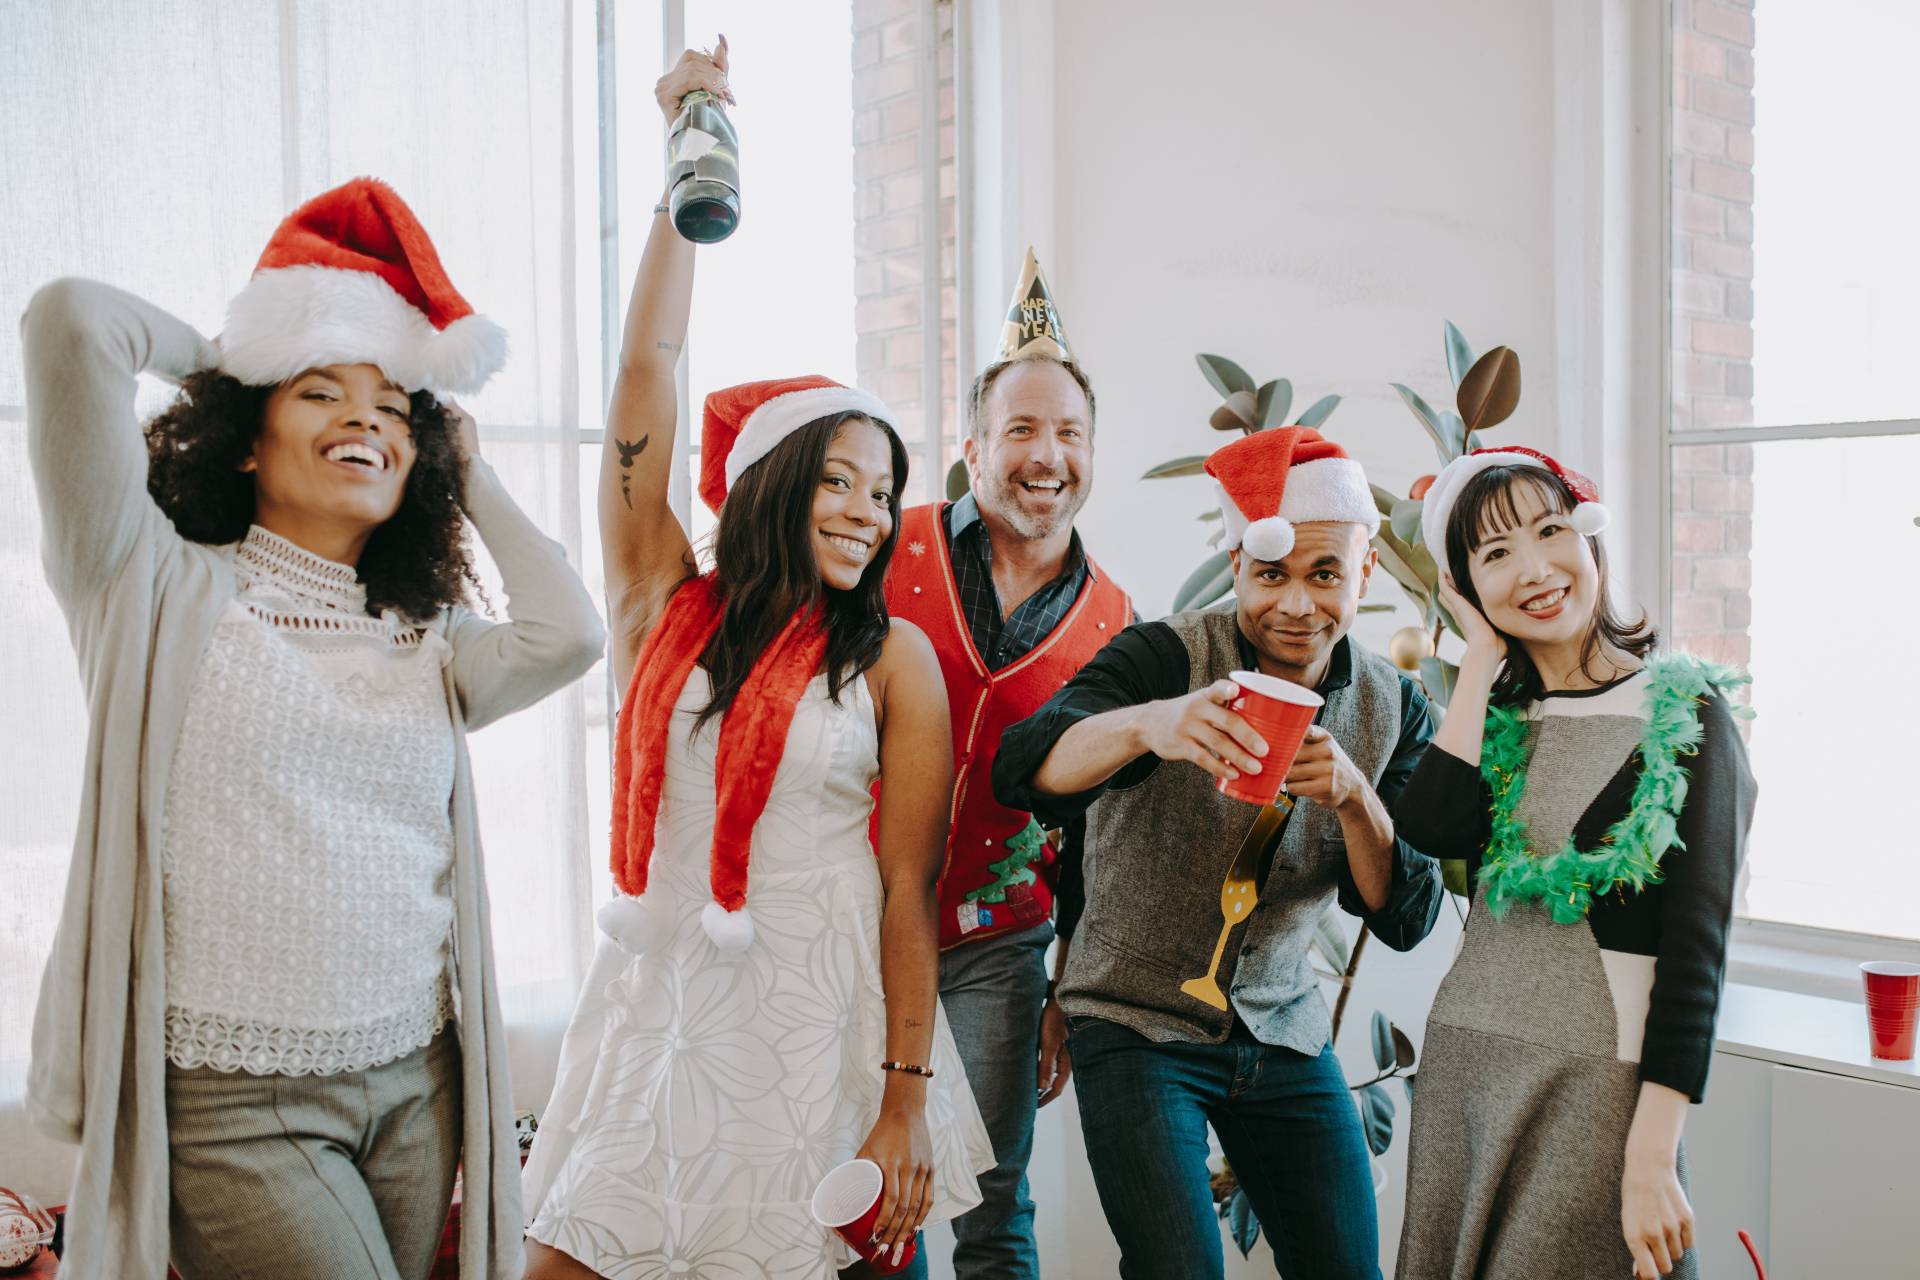 With major holidays behind us, it's likely you'll get an invitation to another company party sometime soon. Avoid brand errors as you mingle.